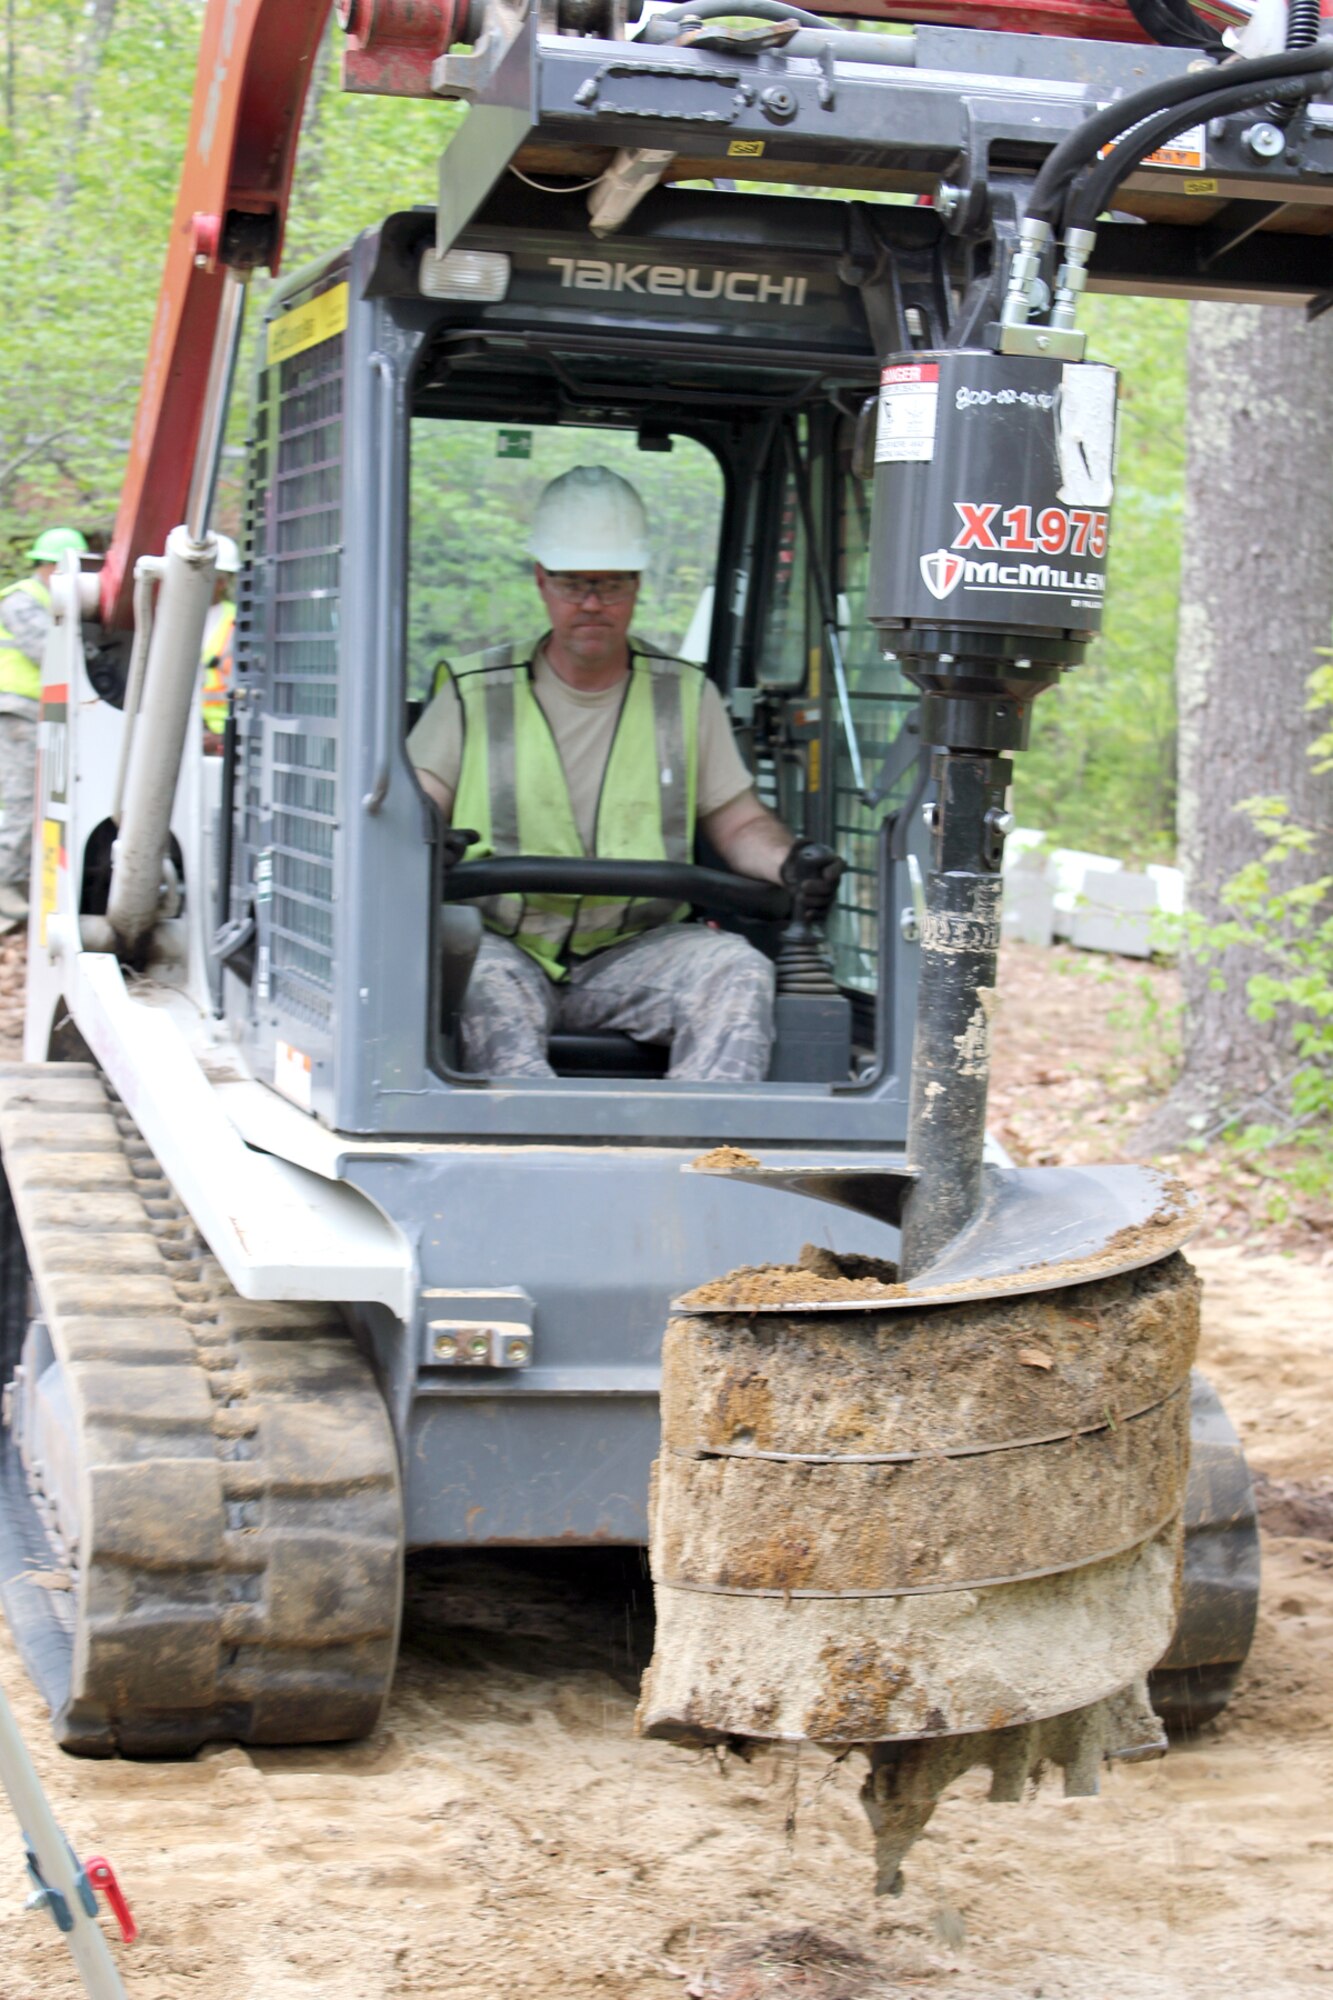 140520-Z-VA676-035 – Senior Airman Edward Peacock uses a small tractor to auger holes for a new cabin at Camp Hind Boy Scout Camp, Raymond, Maine, May 20, 2014. Peacock is a member of the 127th Civil Engineer Squadron, based at Selfridge Air National Guard Base, Mich. The Airmen from Selfridge’s 127th CES, along with Marine Corps Reservists and Army Reservists, are working on various construction projects at the camp during an Innovative Readiness Training mission, which allows military personnel to get training in various tasks and a community organization, in this case the Boy Scouts, to benefit from the work. (U.S. Air National Guard photo by Technical Sgt. Dan Heaton)